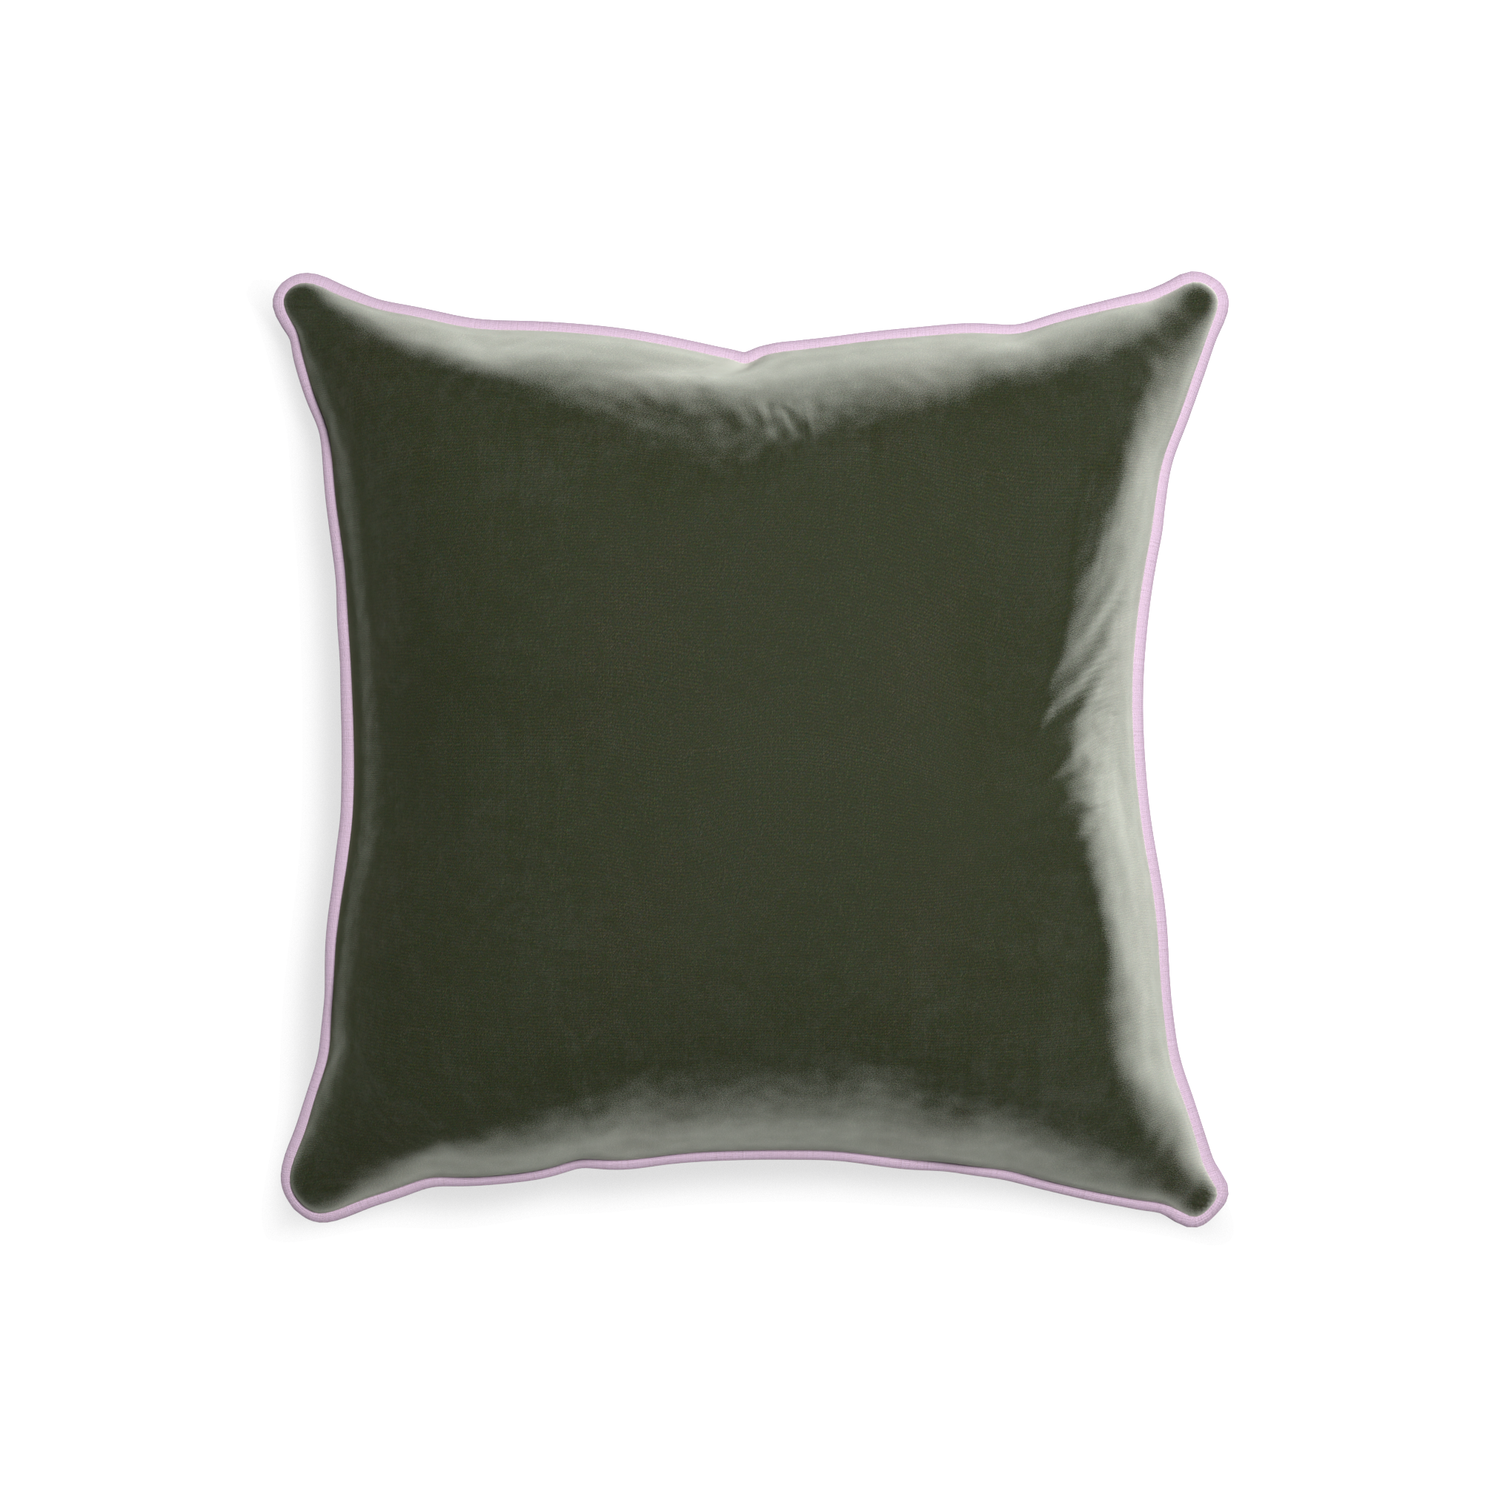 square fern green velvet pillow with lilac piping